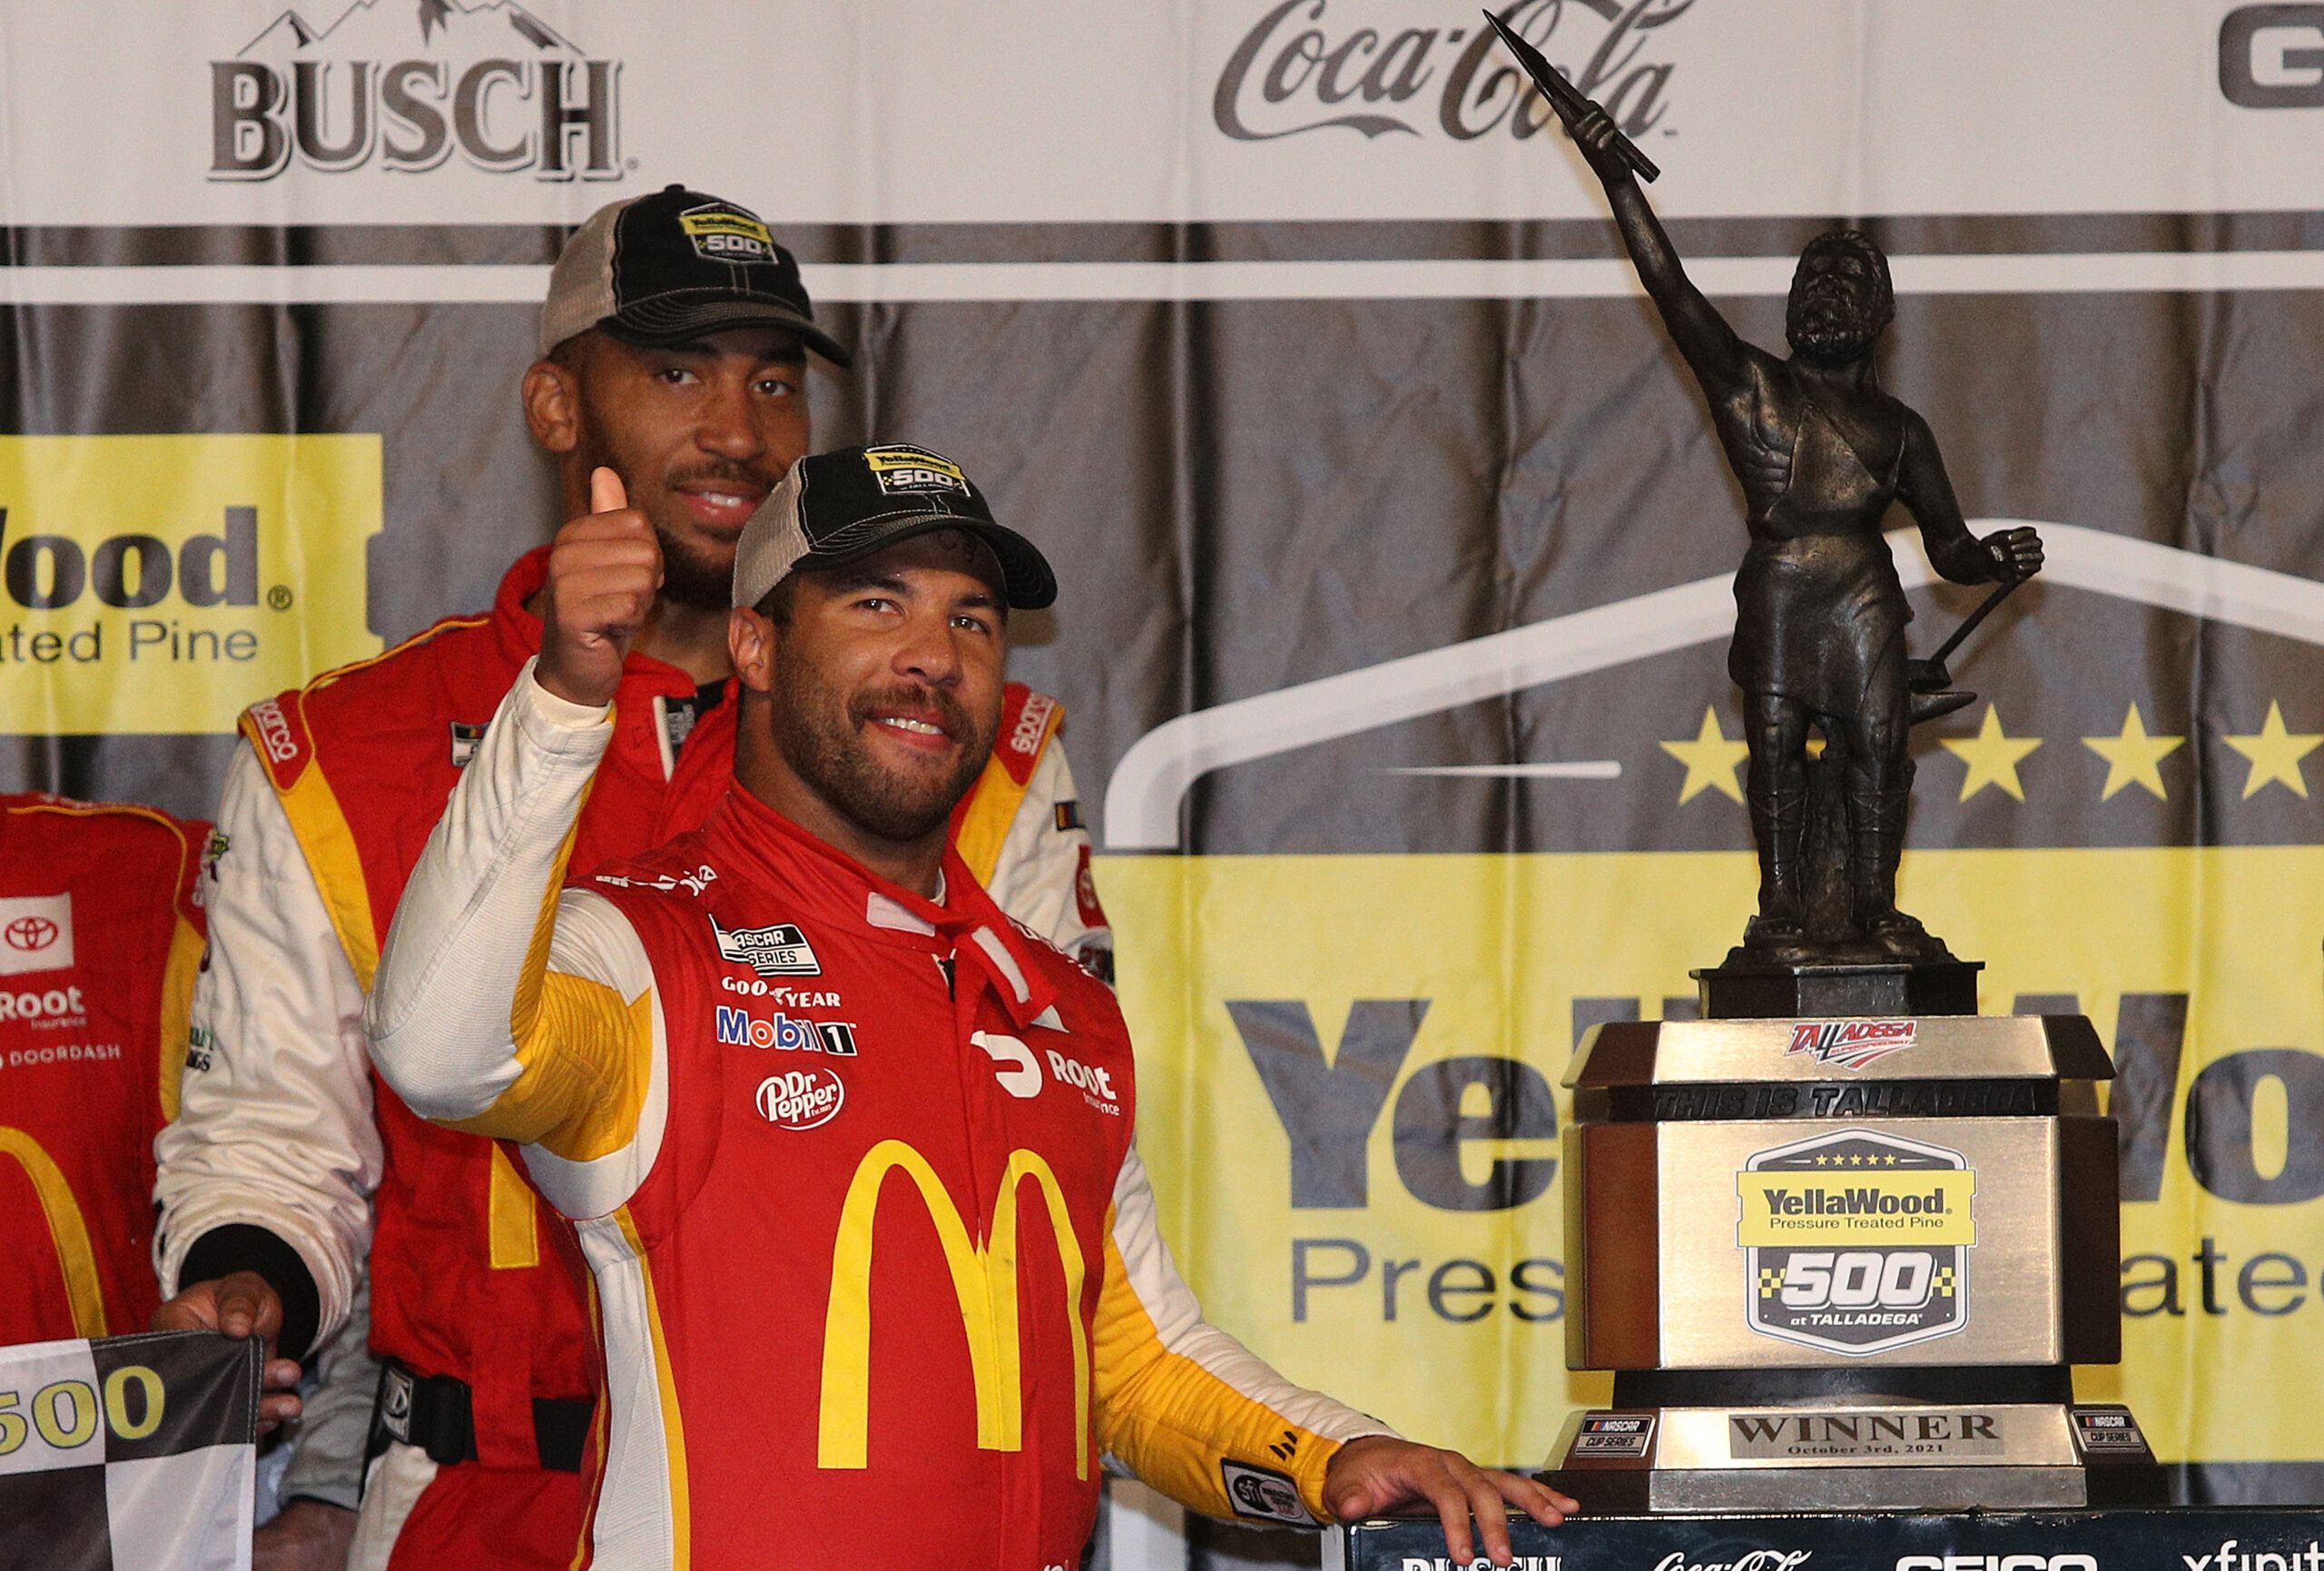 Quite the historical moment for Bubba Wallace. (Photo: Sean Gardner | Getty Images)